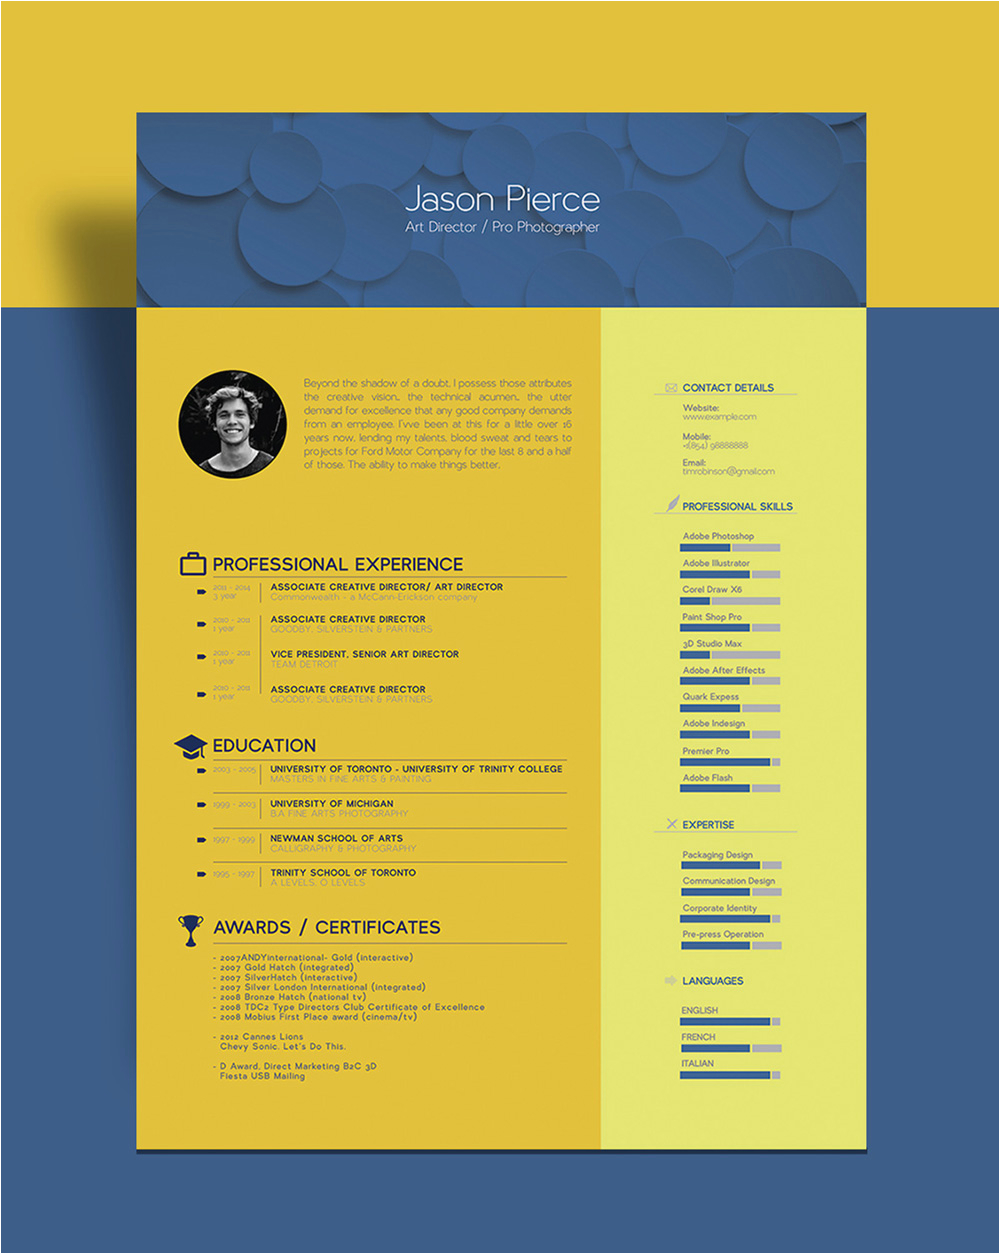 Free Resume Templates for Graphic Designers Free Beautiful Resume Cv Template for Graphic Designer